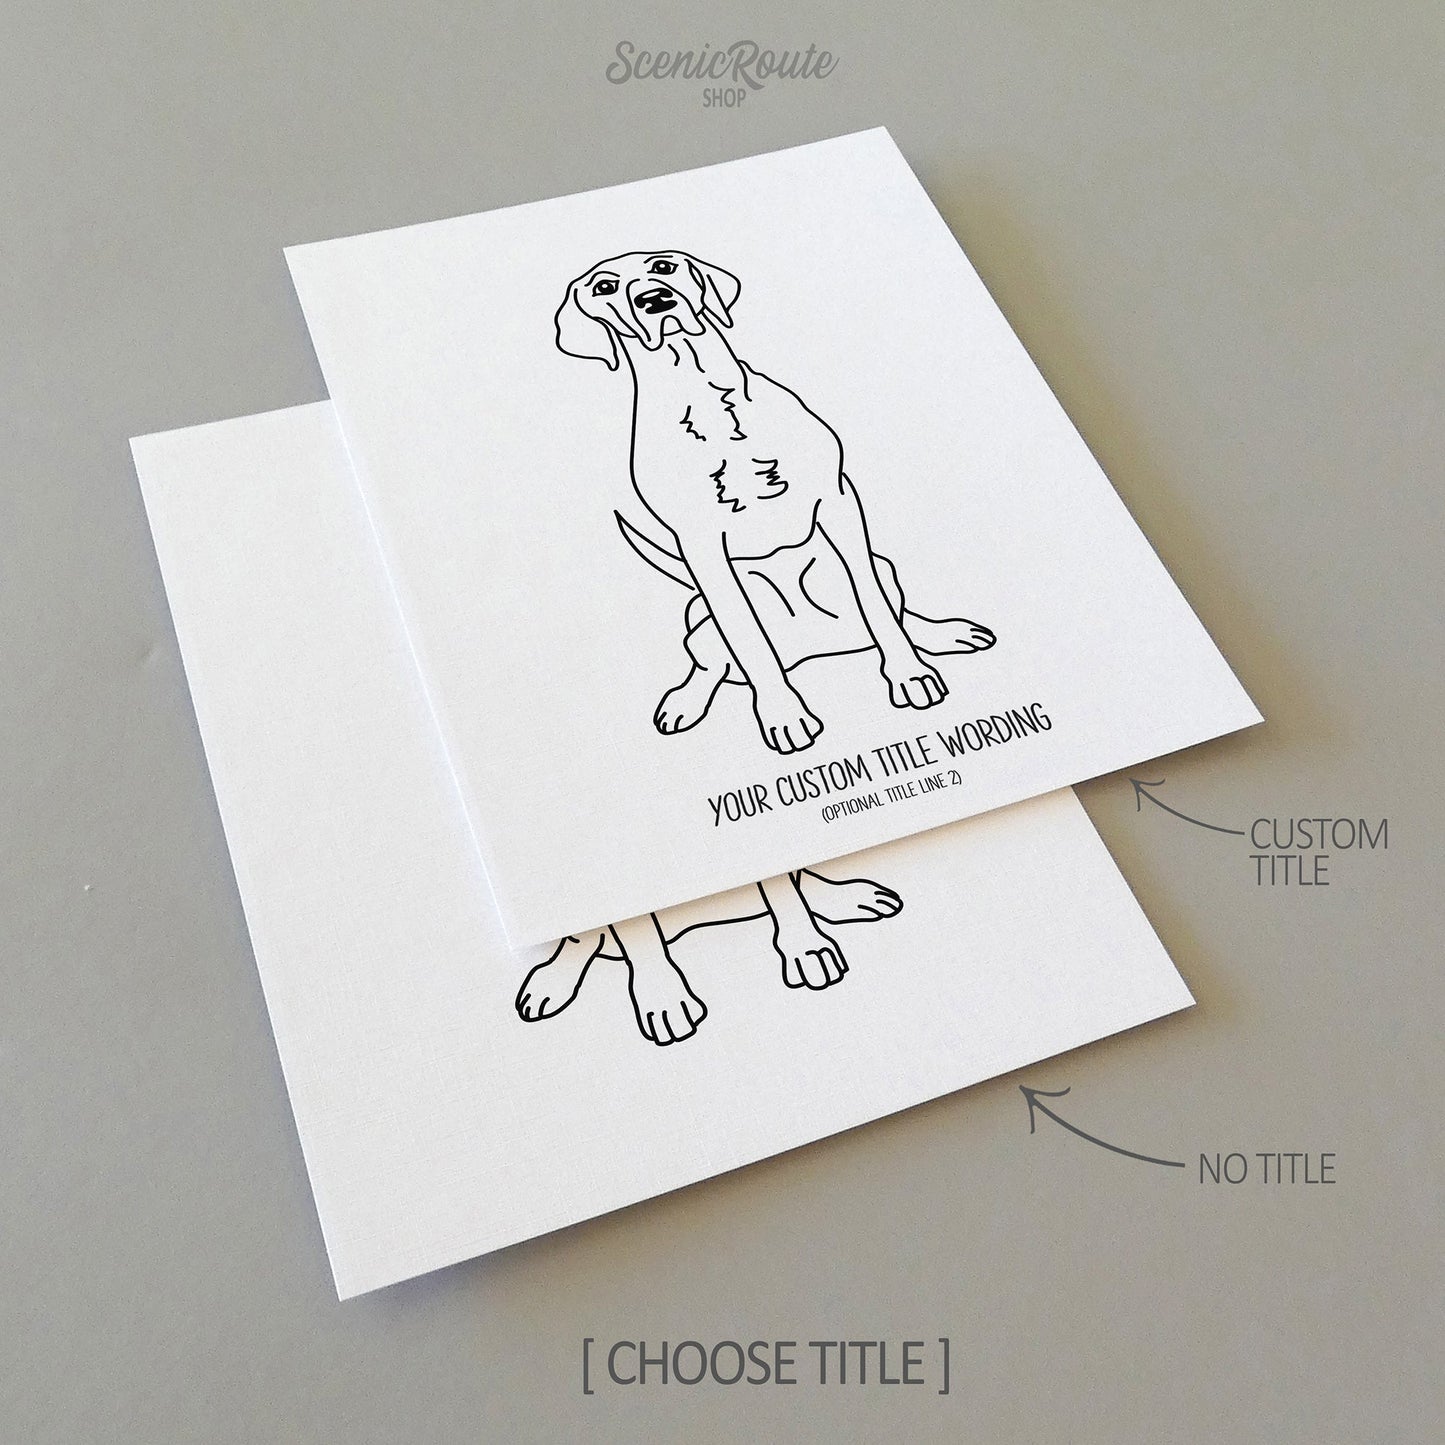 Two line art drawings of a Pointer dog on white linen paper with a gray background.  The pieces are shown with “No Title” and “Custom Title” options for the available art print options.